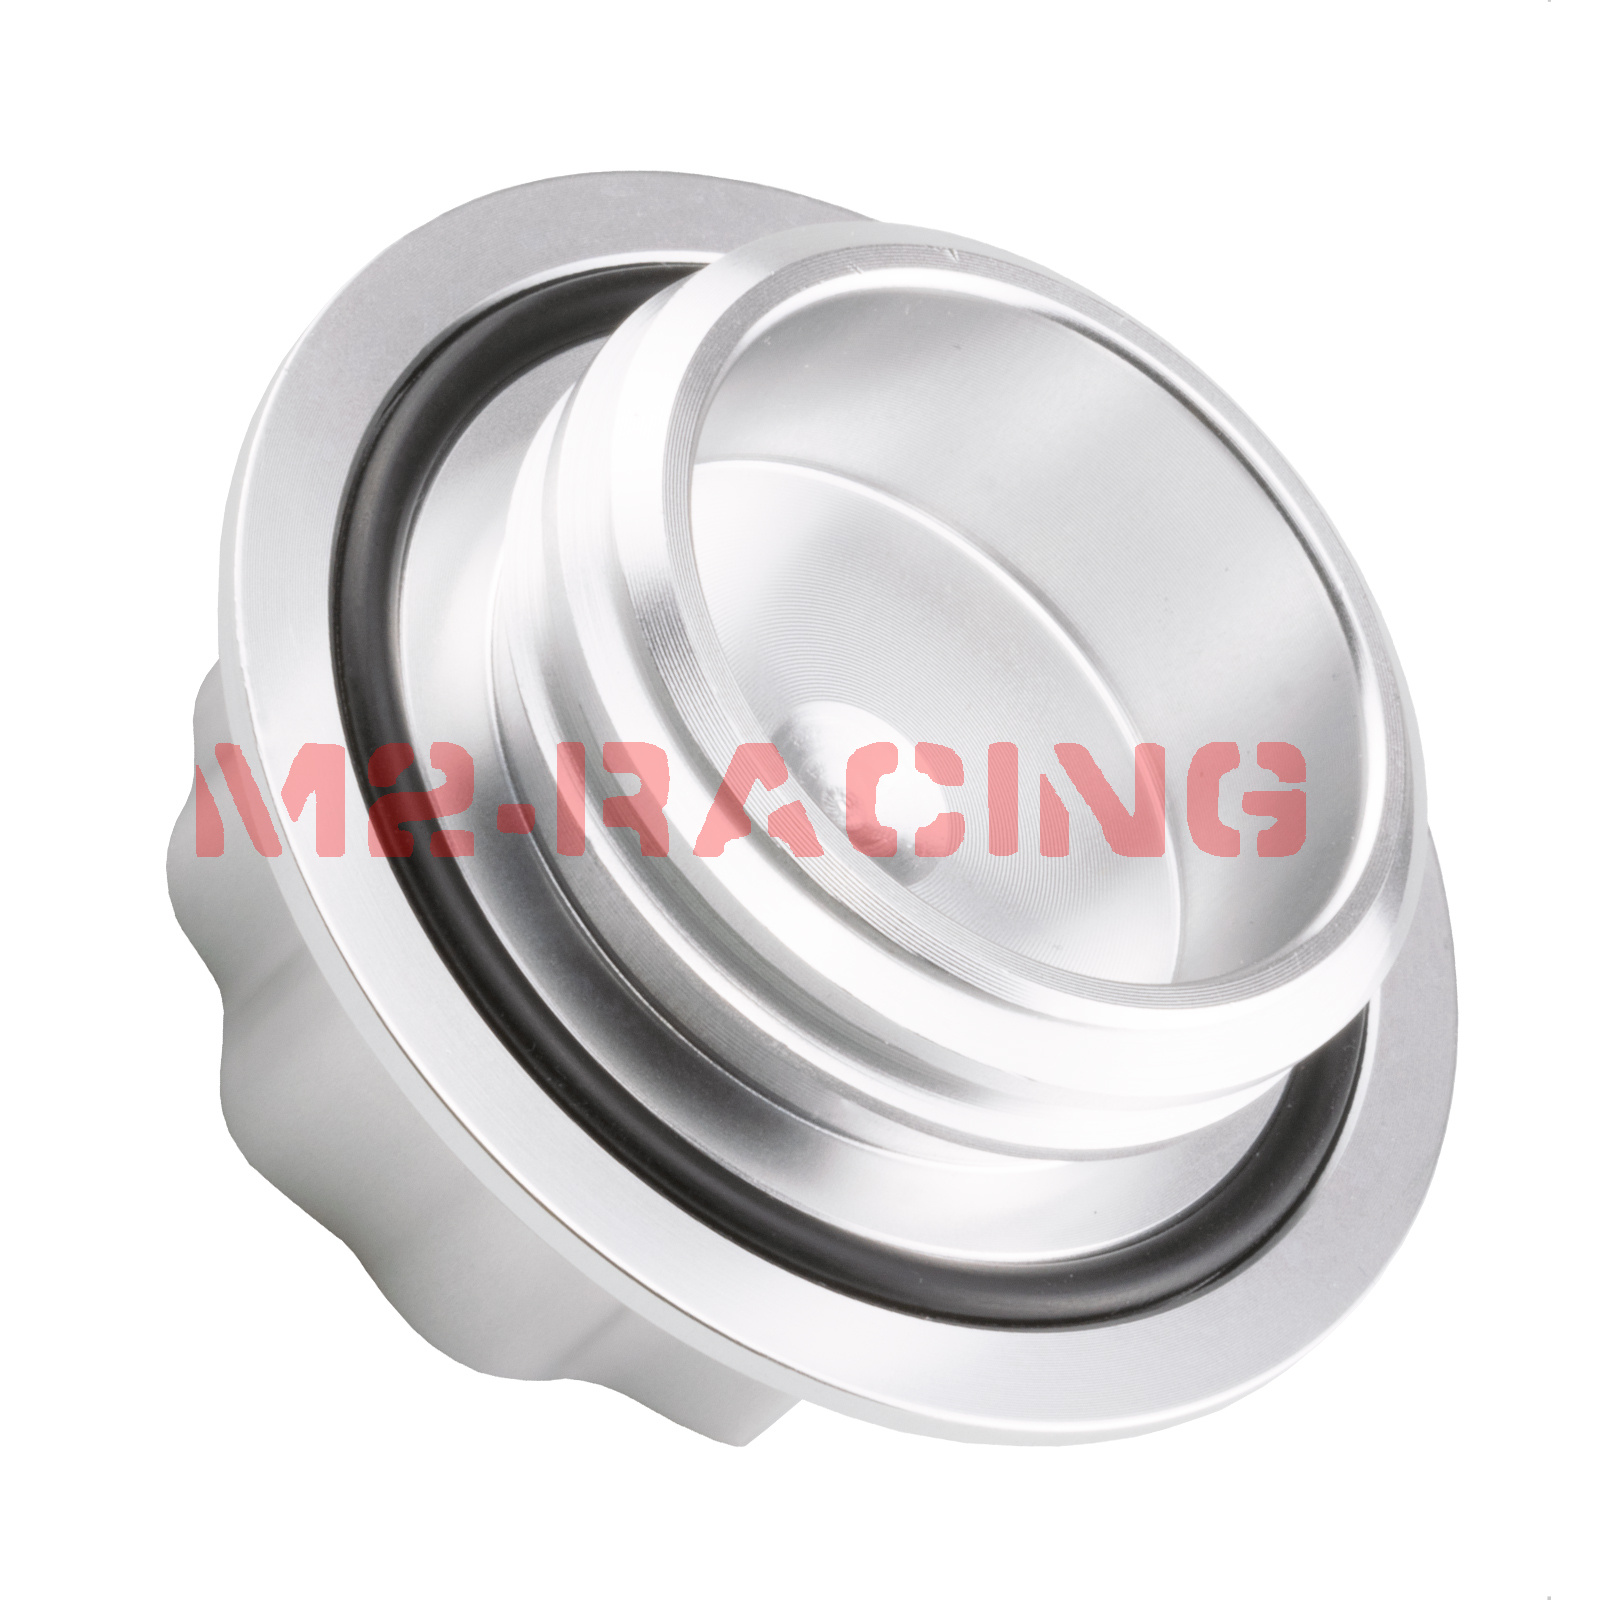 Silver Middle Finger Fist Engine Oil Filter Tank Cap Cover Aluminum For Nissan